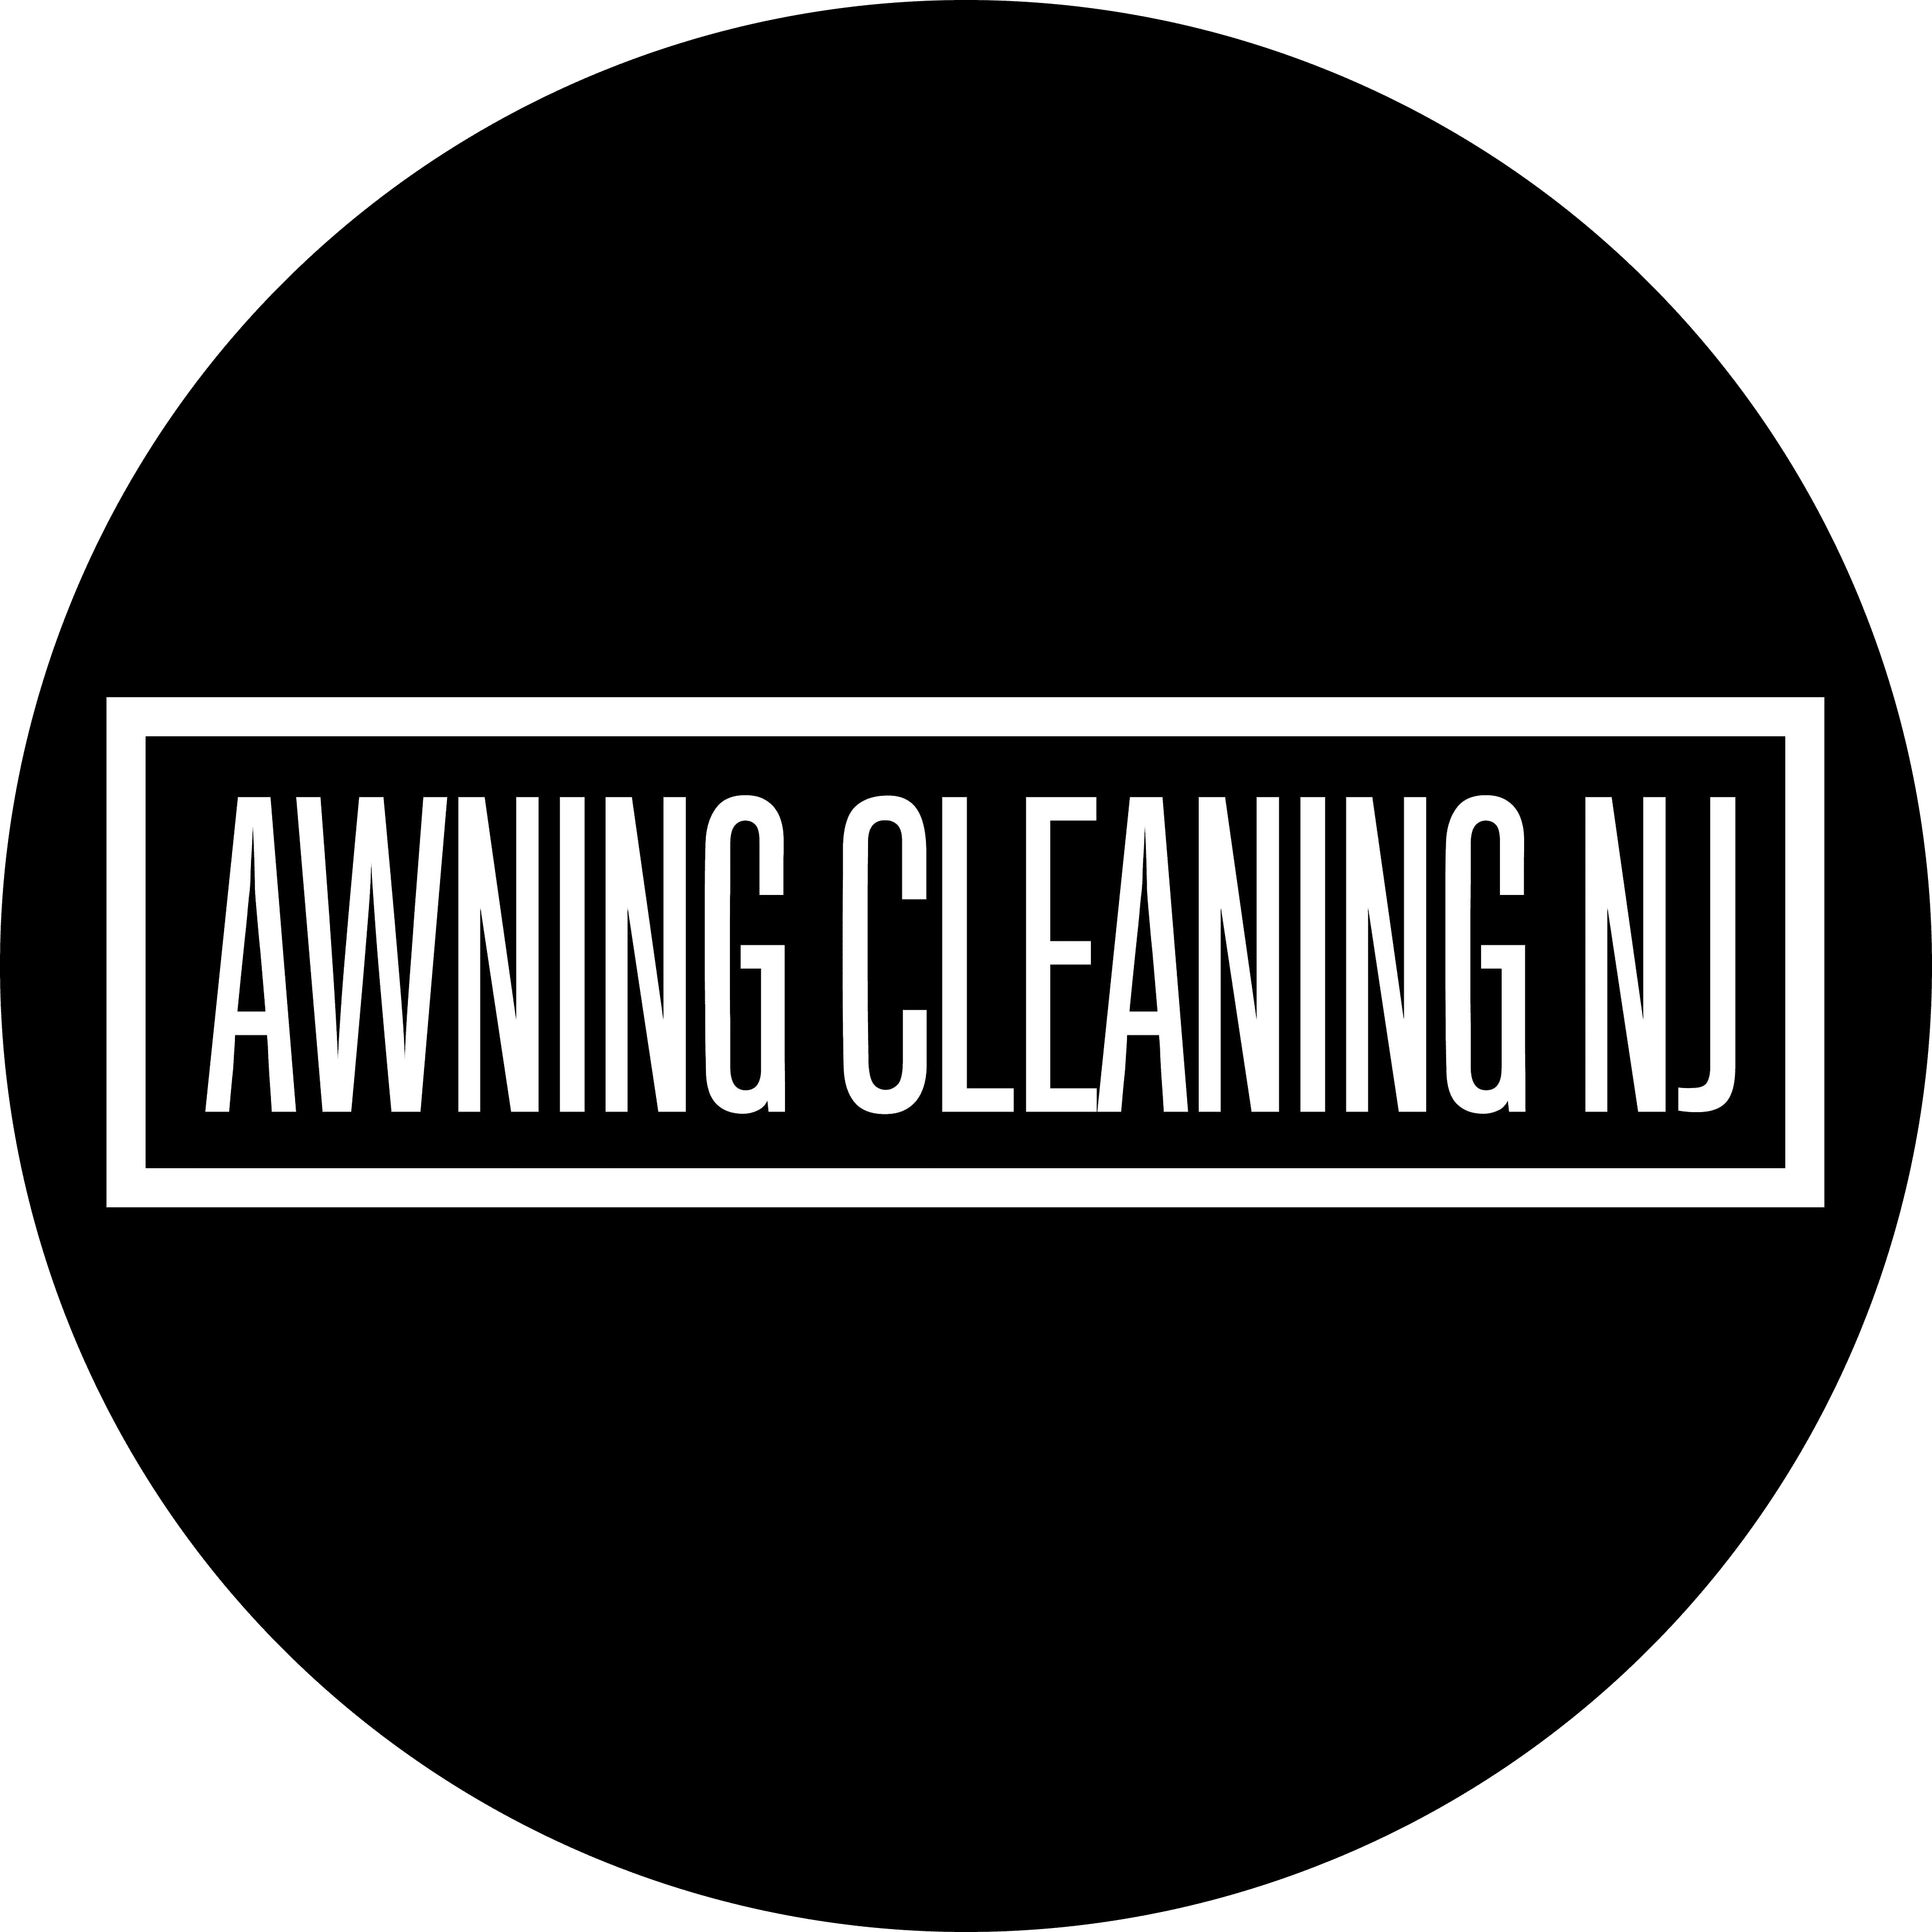 Awning Cleaning NJ